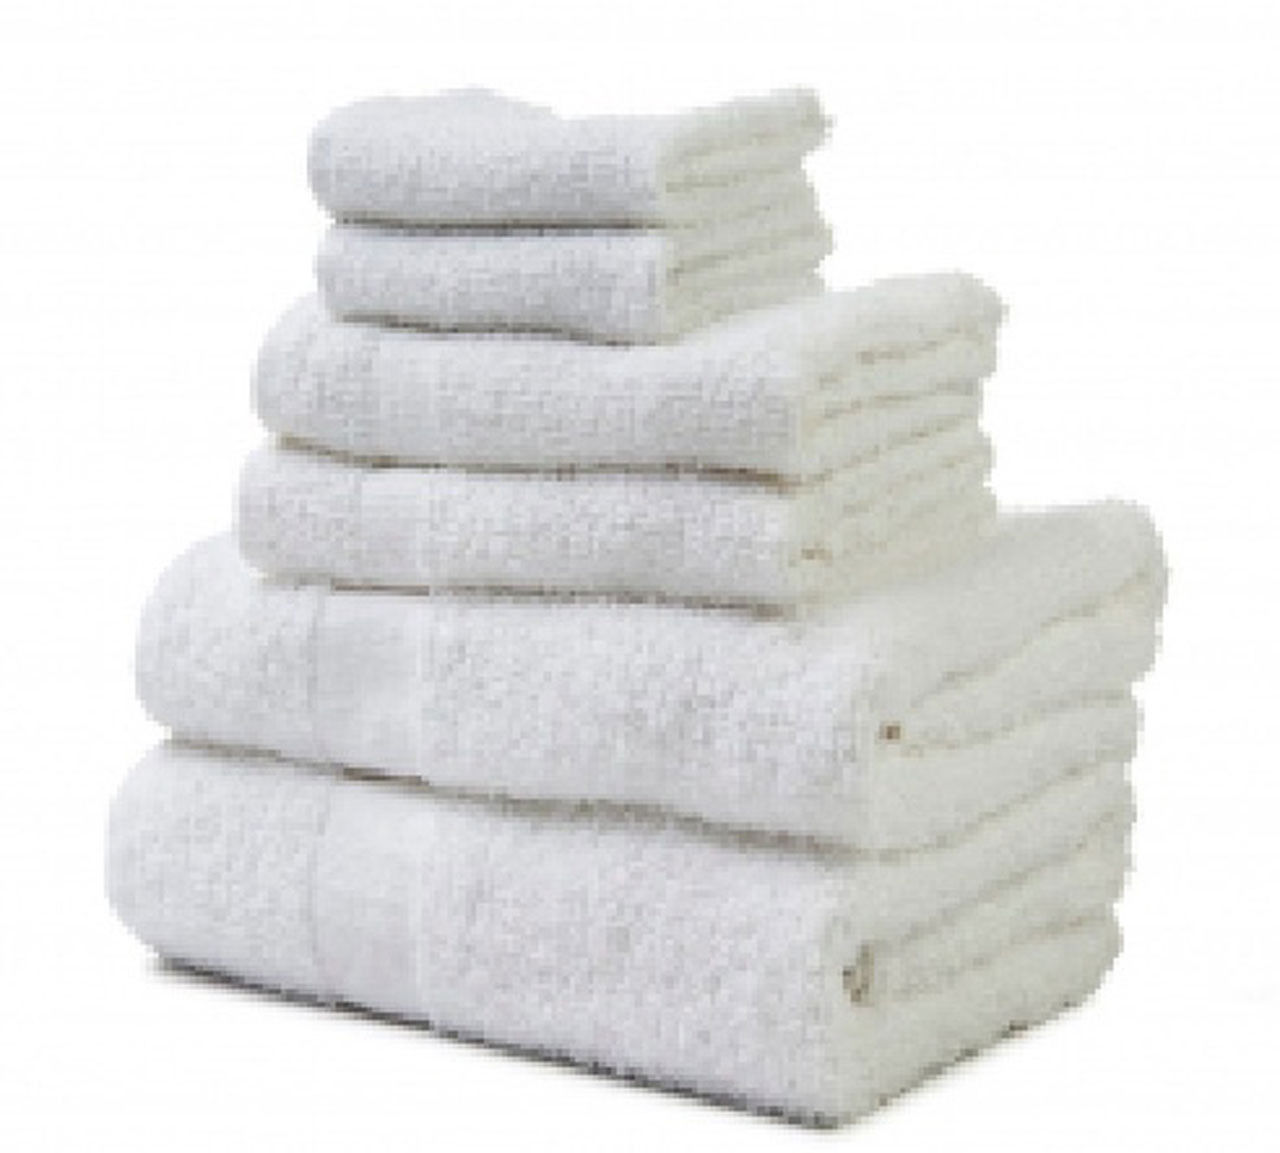 What is the composition of these golf towels?